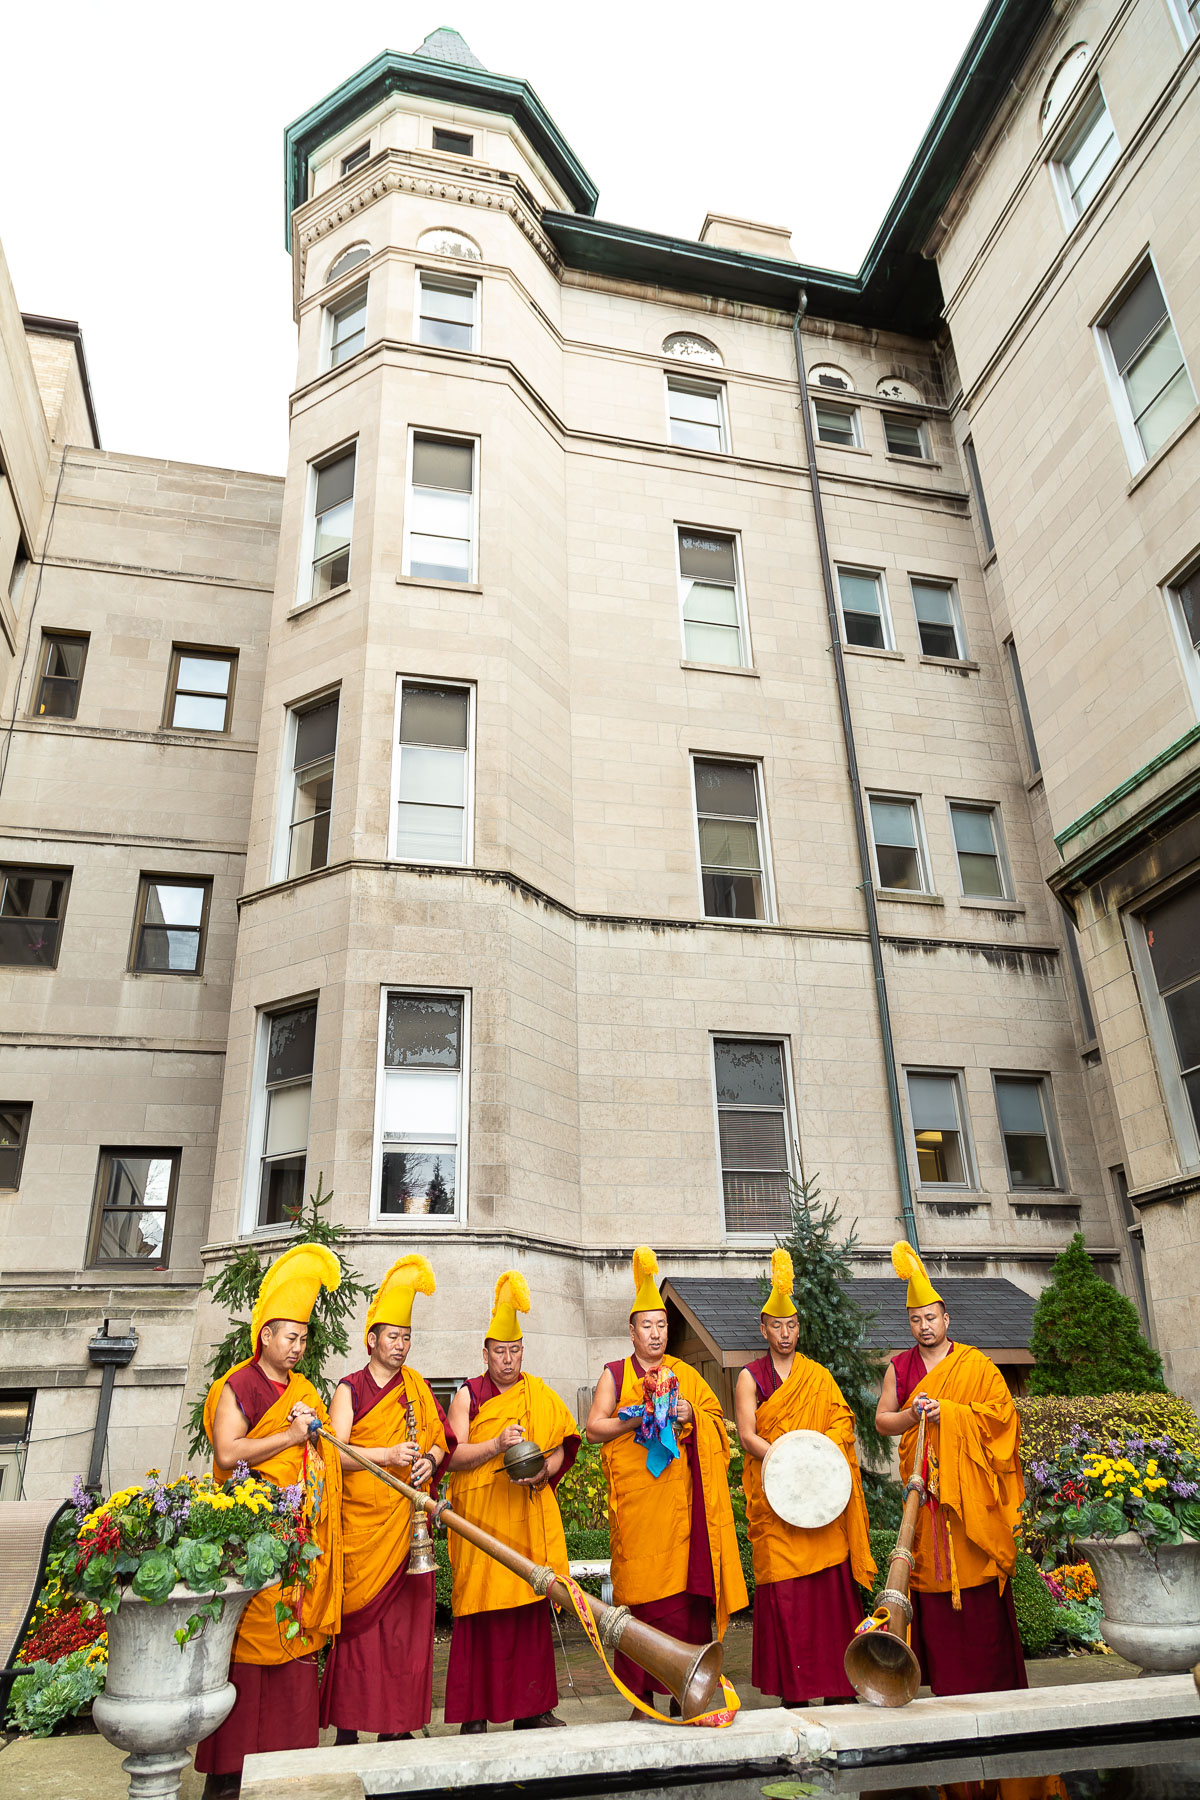 The monks continued the closing ceremony at the reflection pond in the Vincentian Residence courtyard. Their visit was sponsored by the DePaul Center for Religion, Culture and Community and the Department of Religious Studies. (DePaul University/Jeff Carrion)